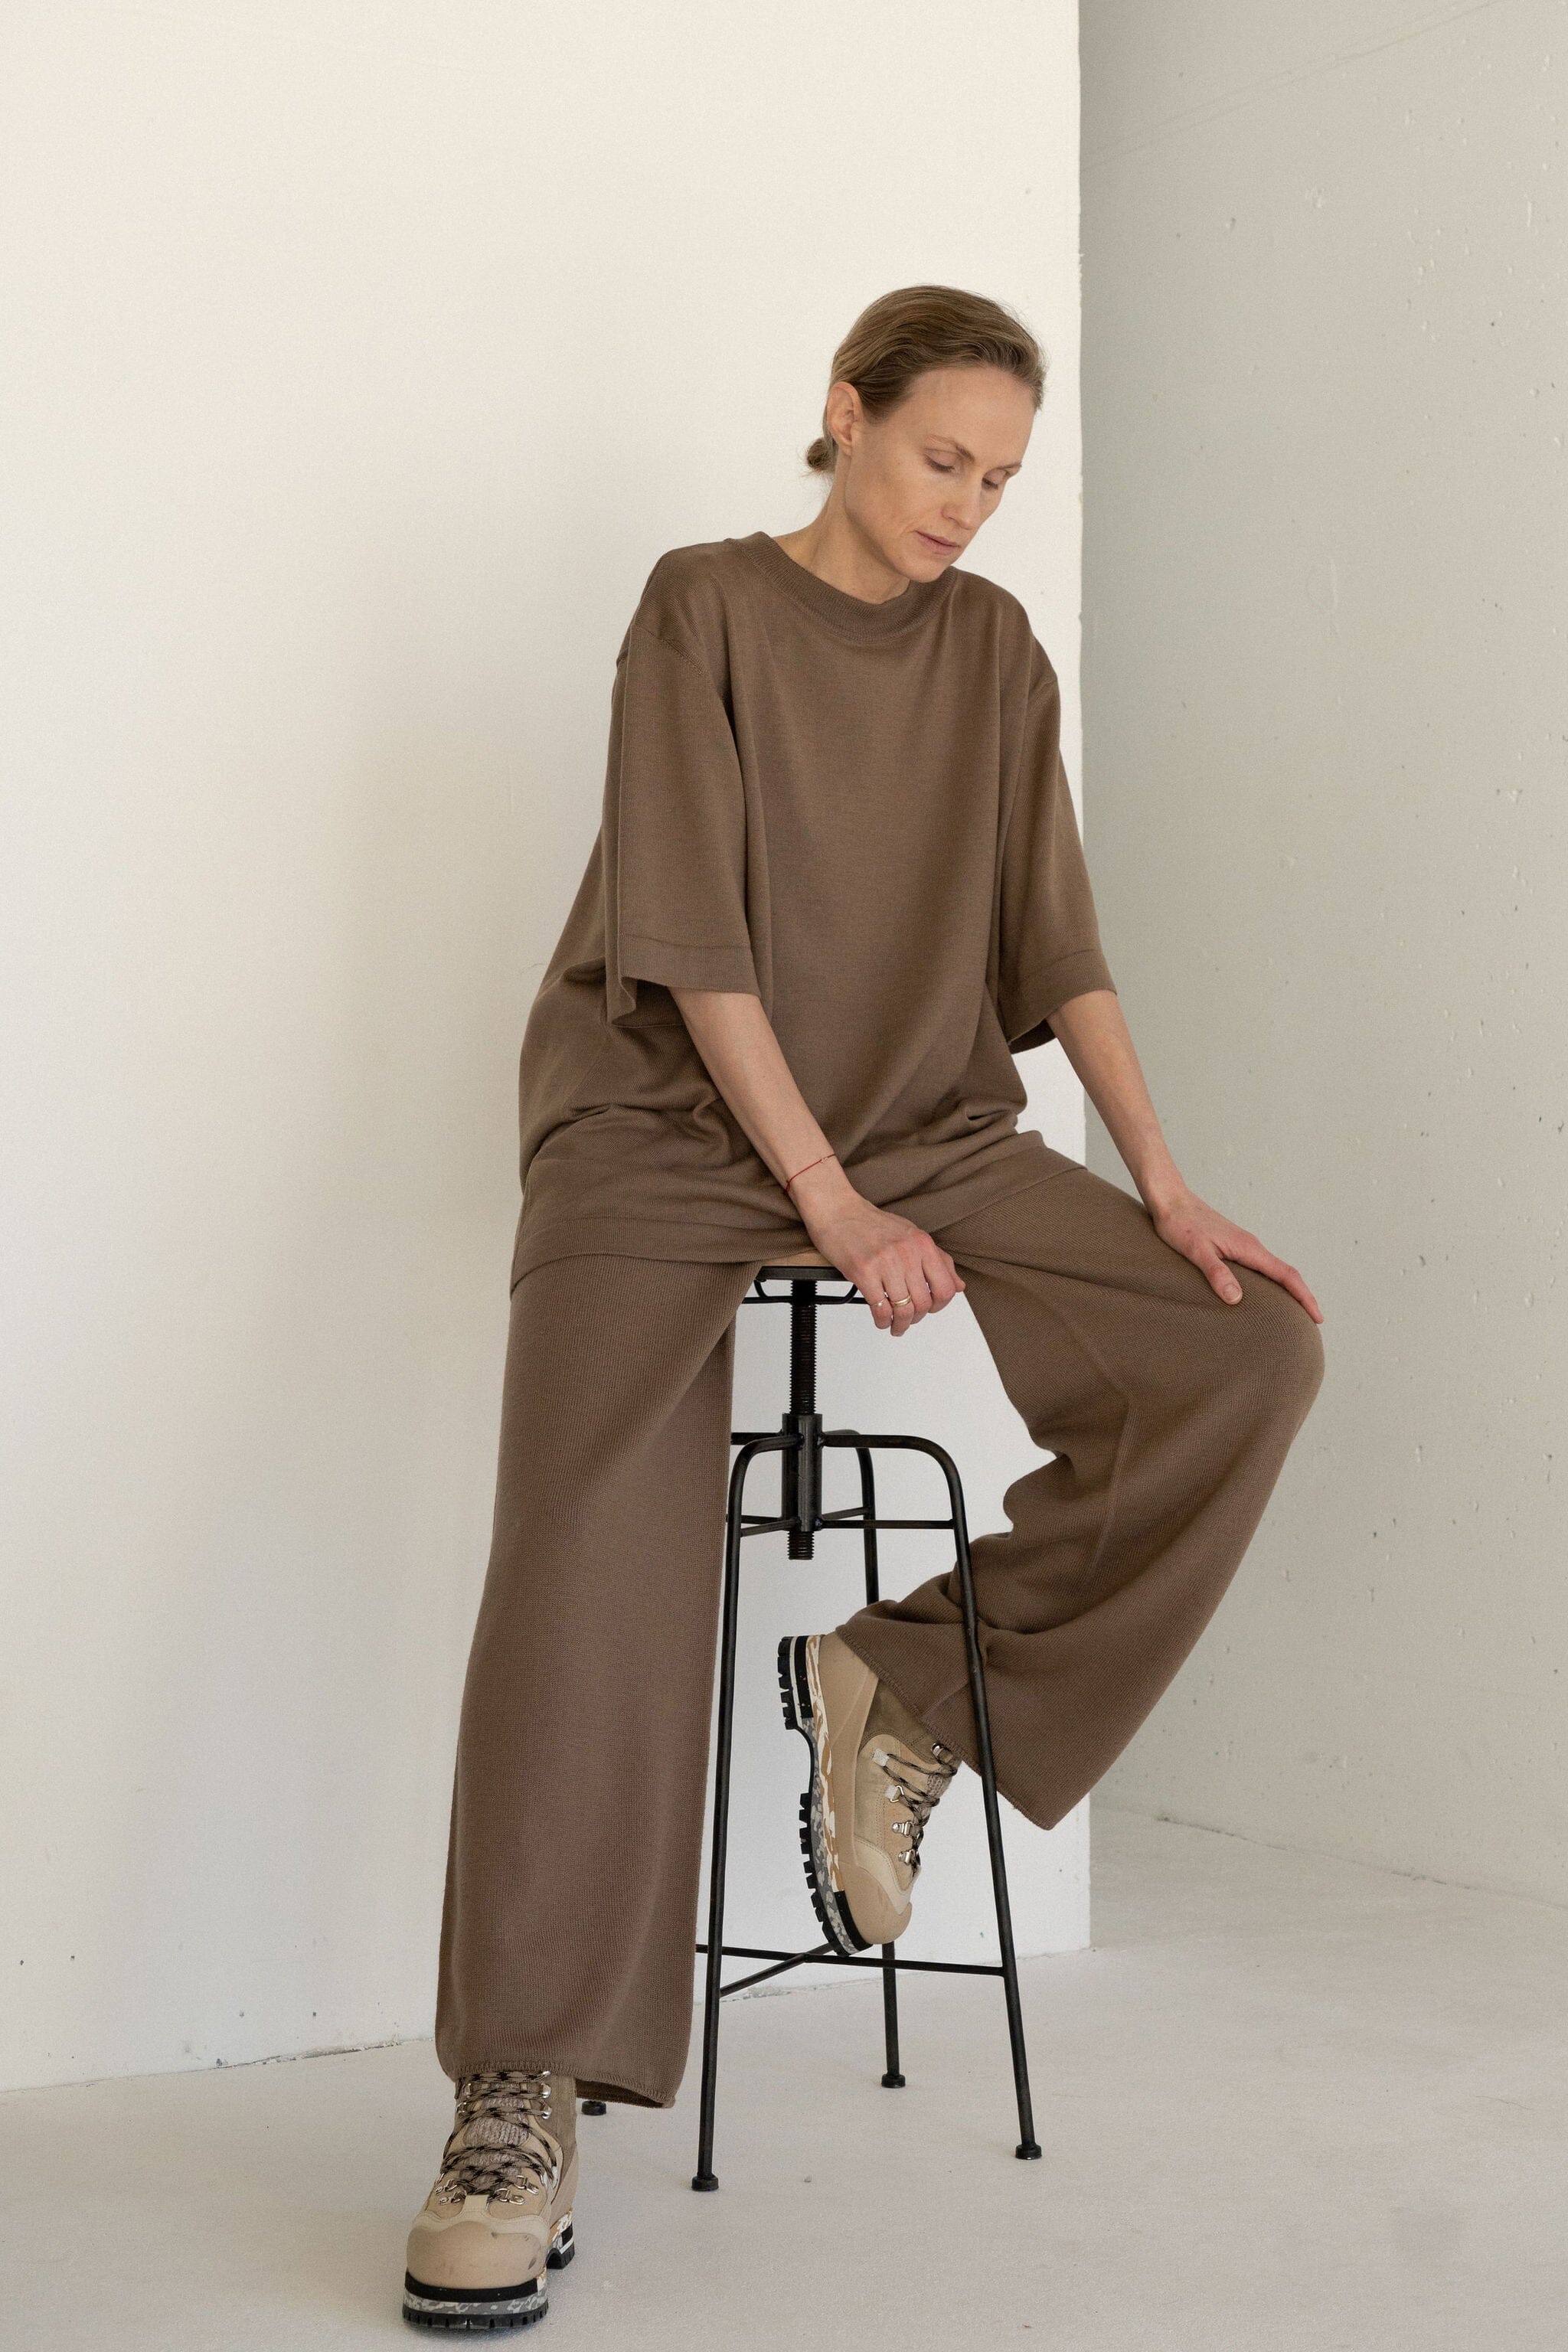 TRUFFLE EXTRA FINE MERINO WOOL T-SHIRT AND TROUSERS SET for lovers and trees 